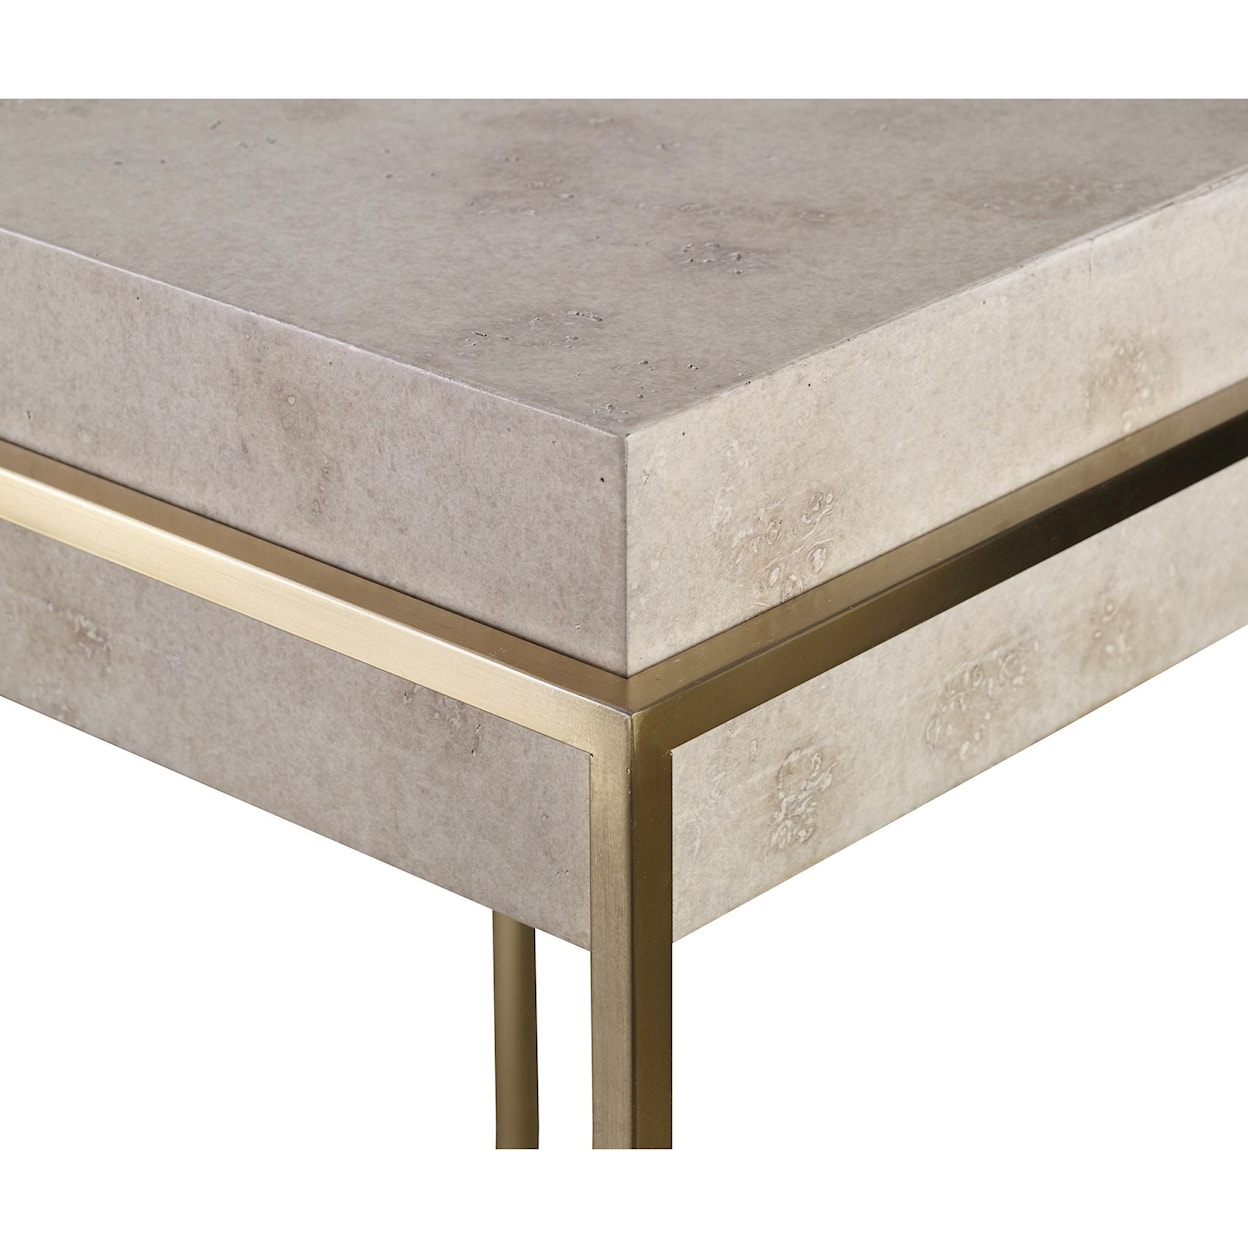 Uttermost Accent Furniture - Occasional Tables Inda Modern Accent Table